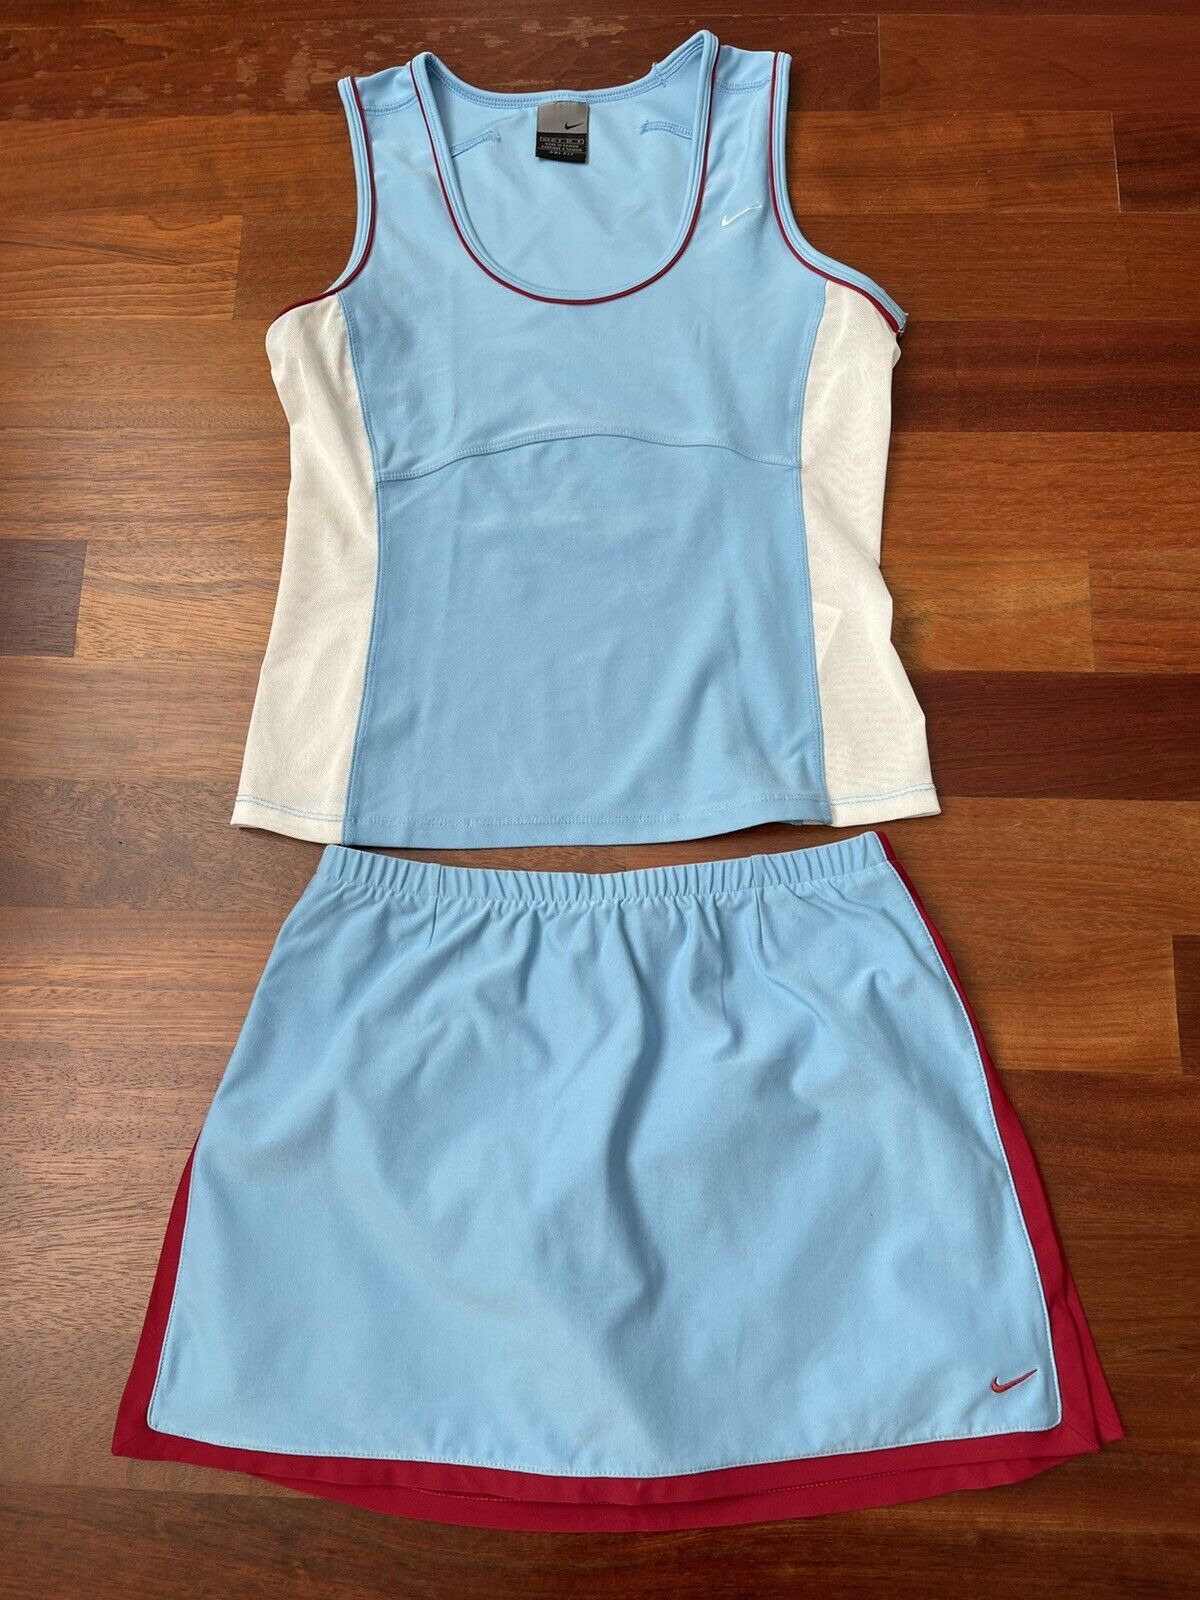 NIKE store DRI-FIT Tennis Outfit Matching Top Light Blue Skirt White Sale